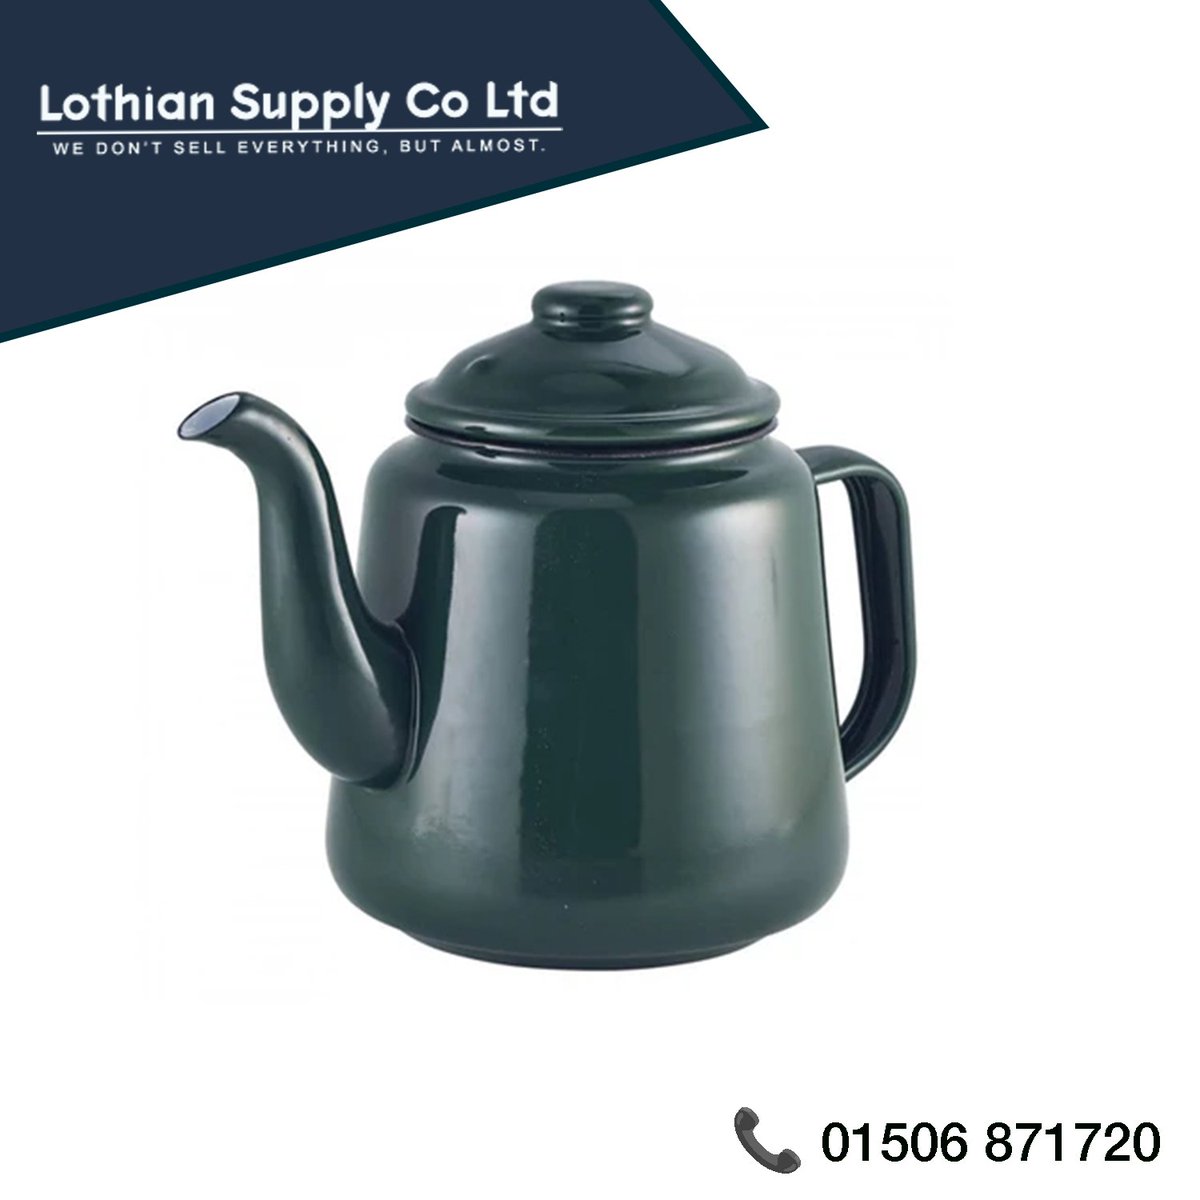 You can't beat a pot of tea on a Sunday morning and this dark green enamel tea pot is a great way to serve it. Why not call us to place order tomorrow? We're open 9-5. #nationalteaday #teapots #hospitalitysupplies